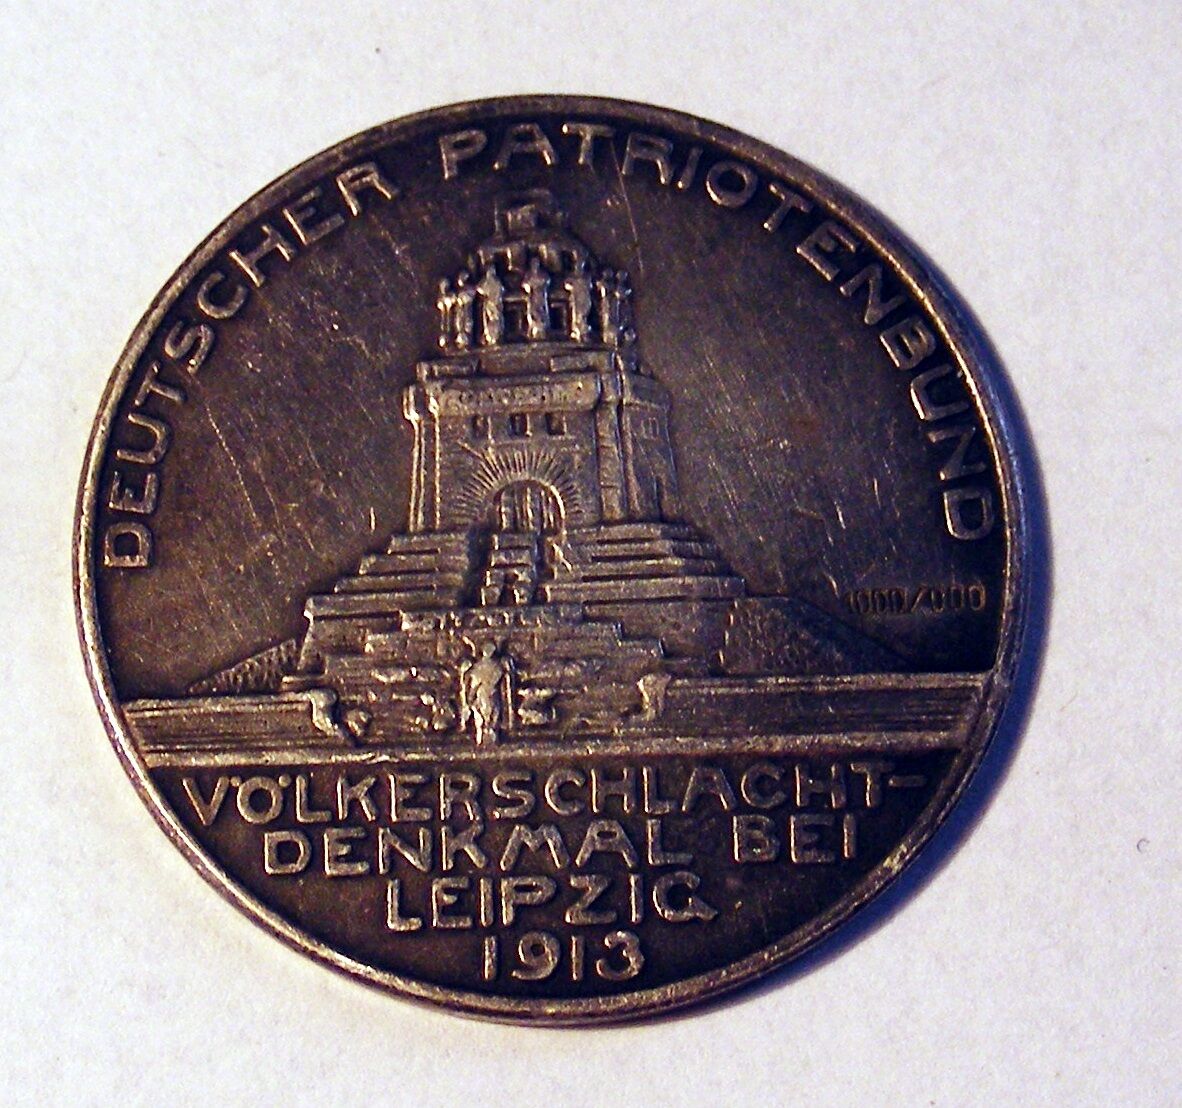 1813-1913, Germany, Leipzig. Battle of the Nations silver  Medal.